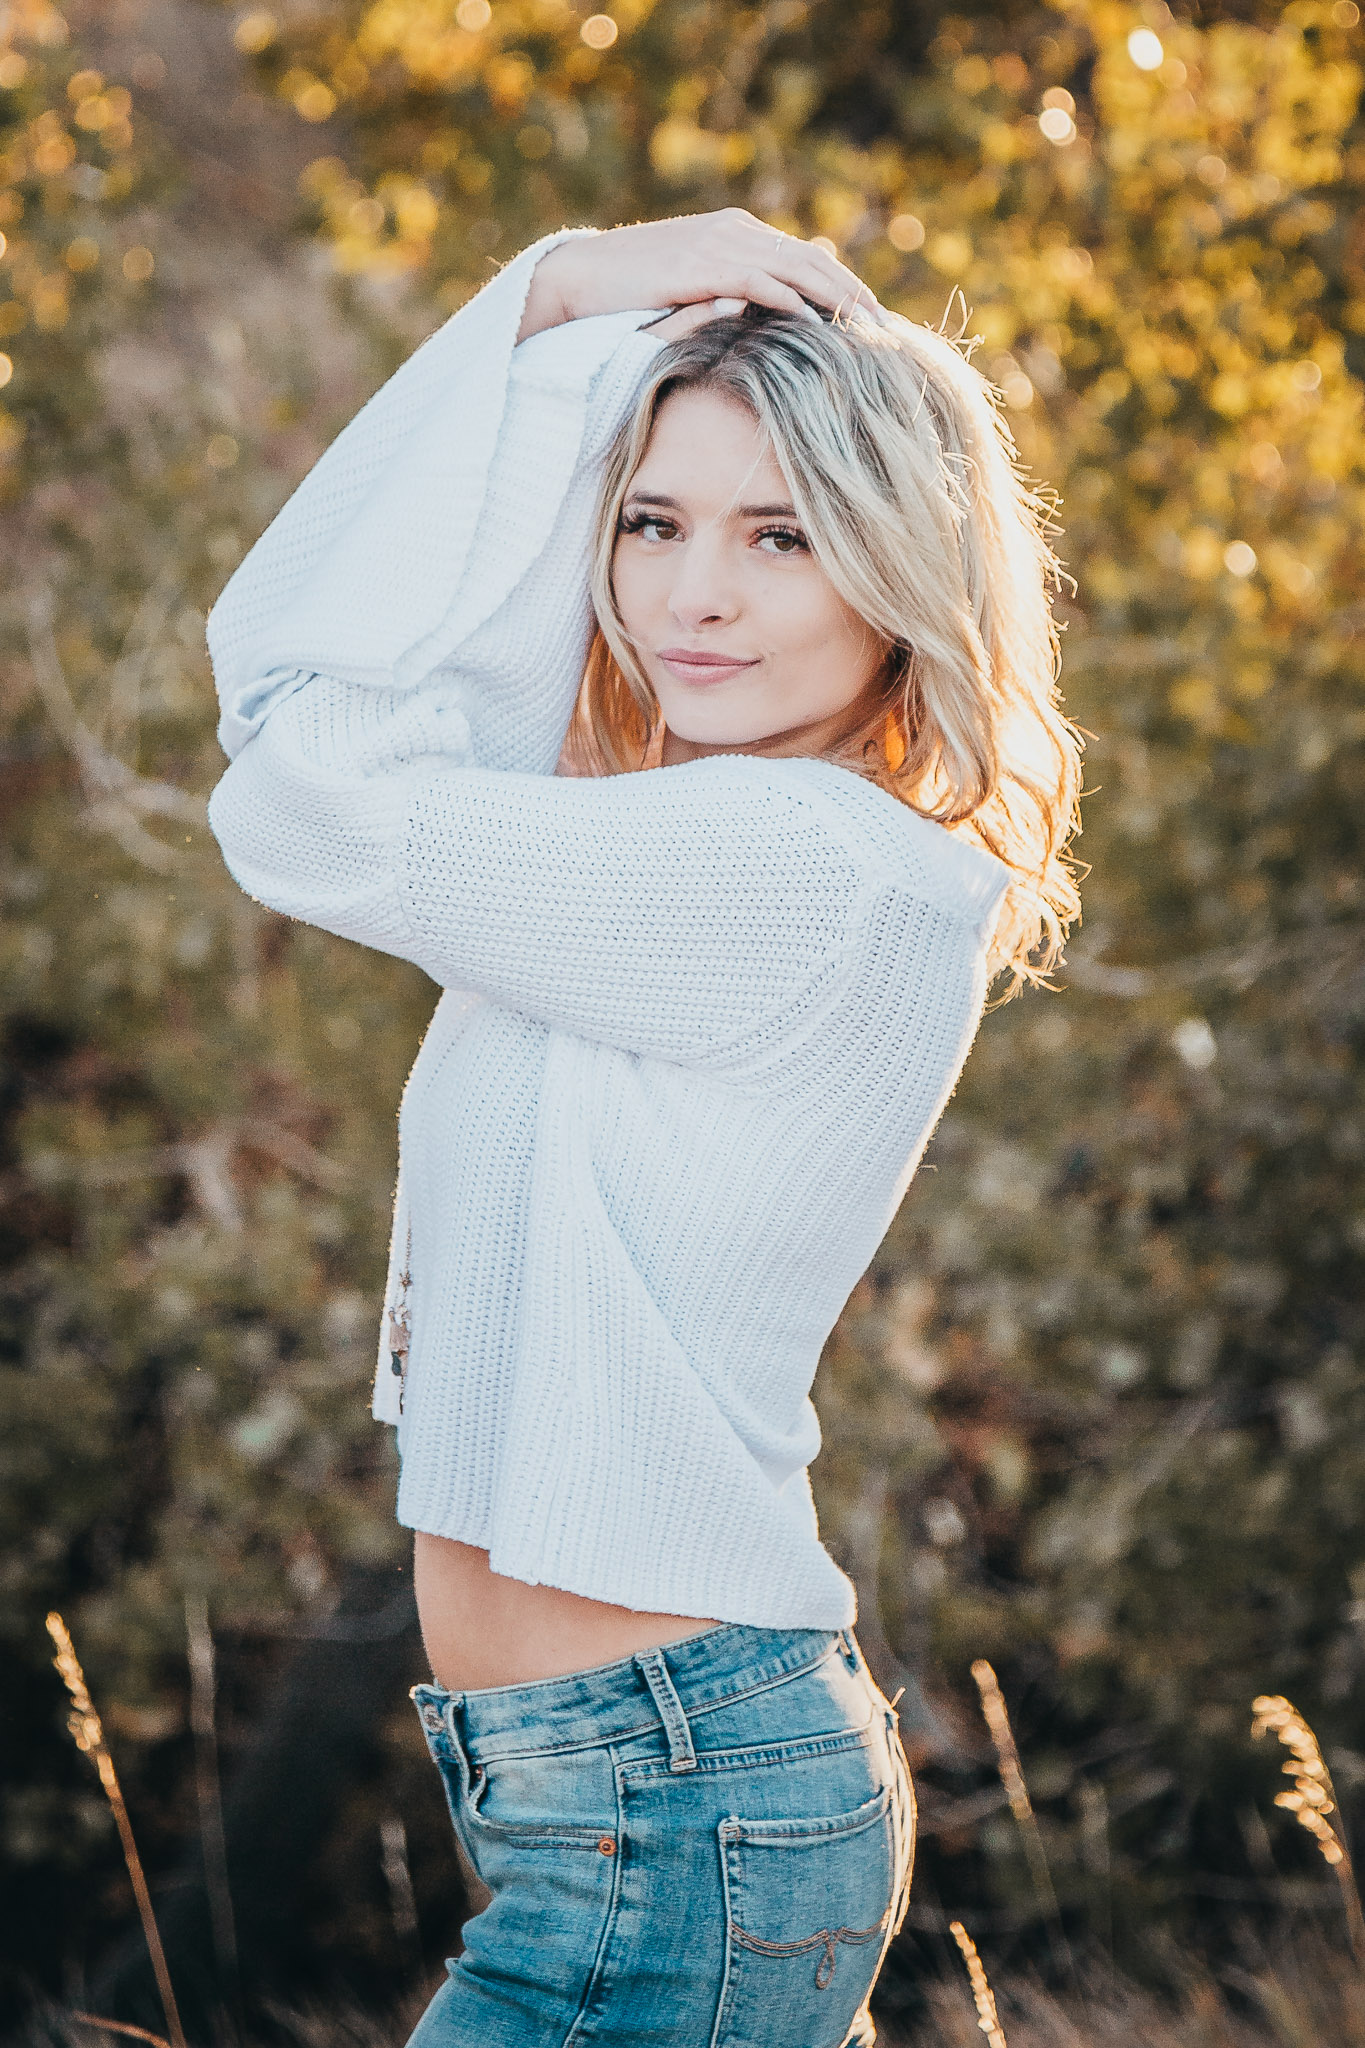  Highlands ranch senior photographer - fall outdoor session with senior girl 